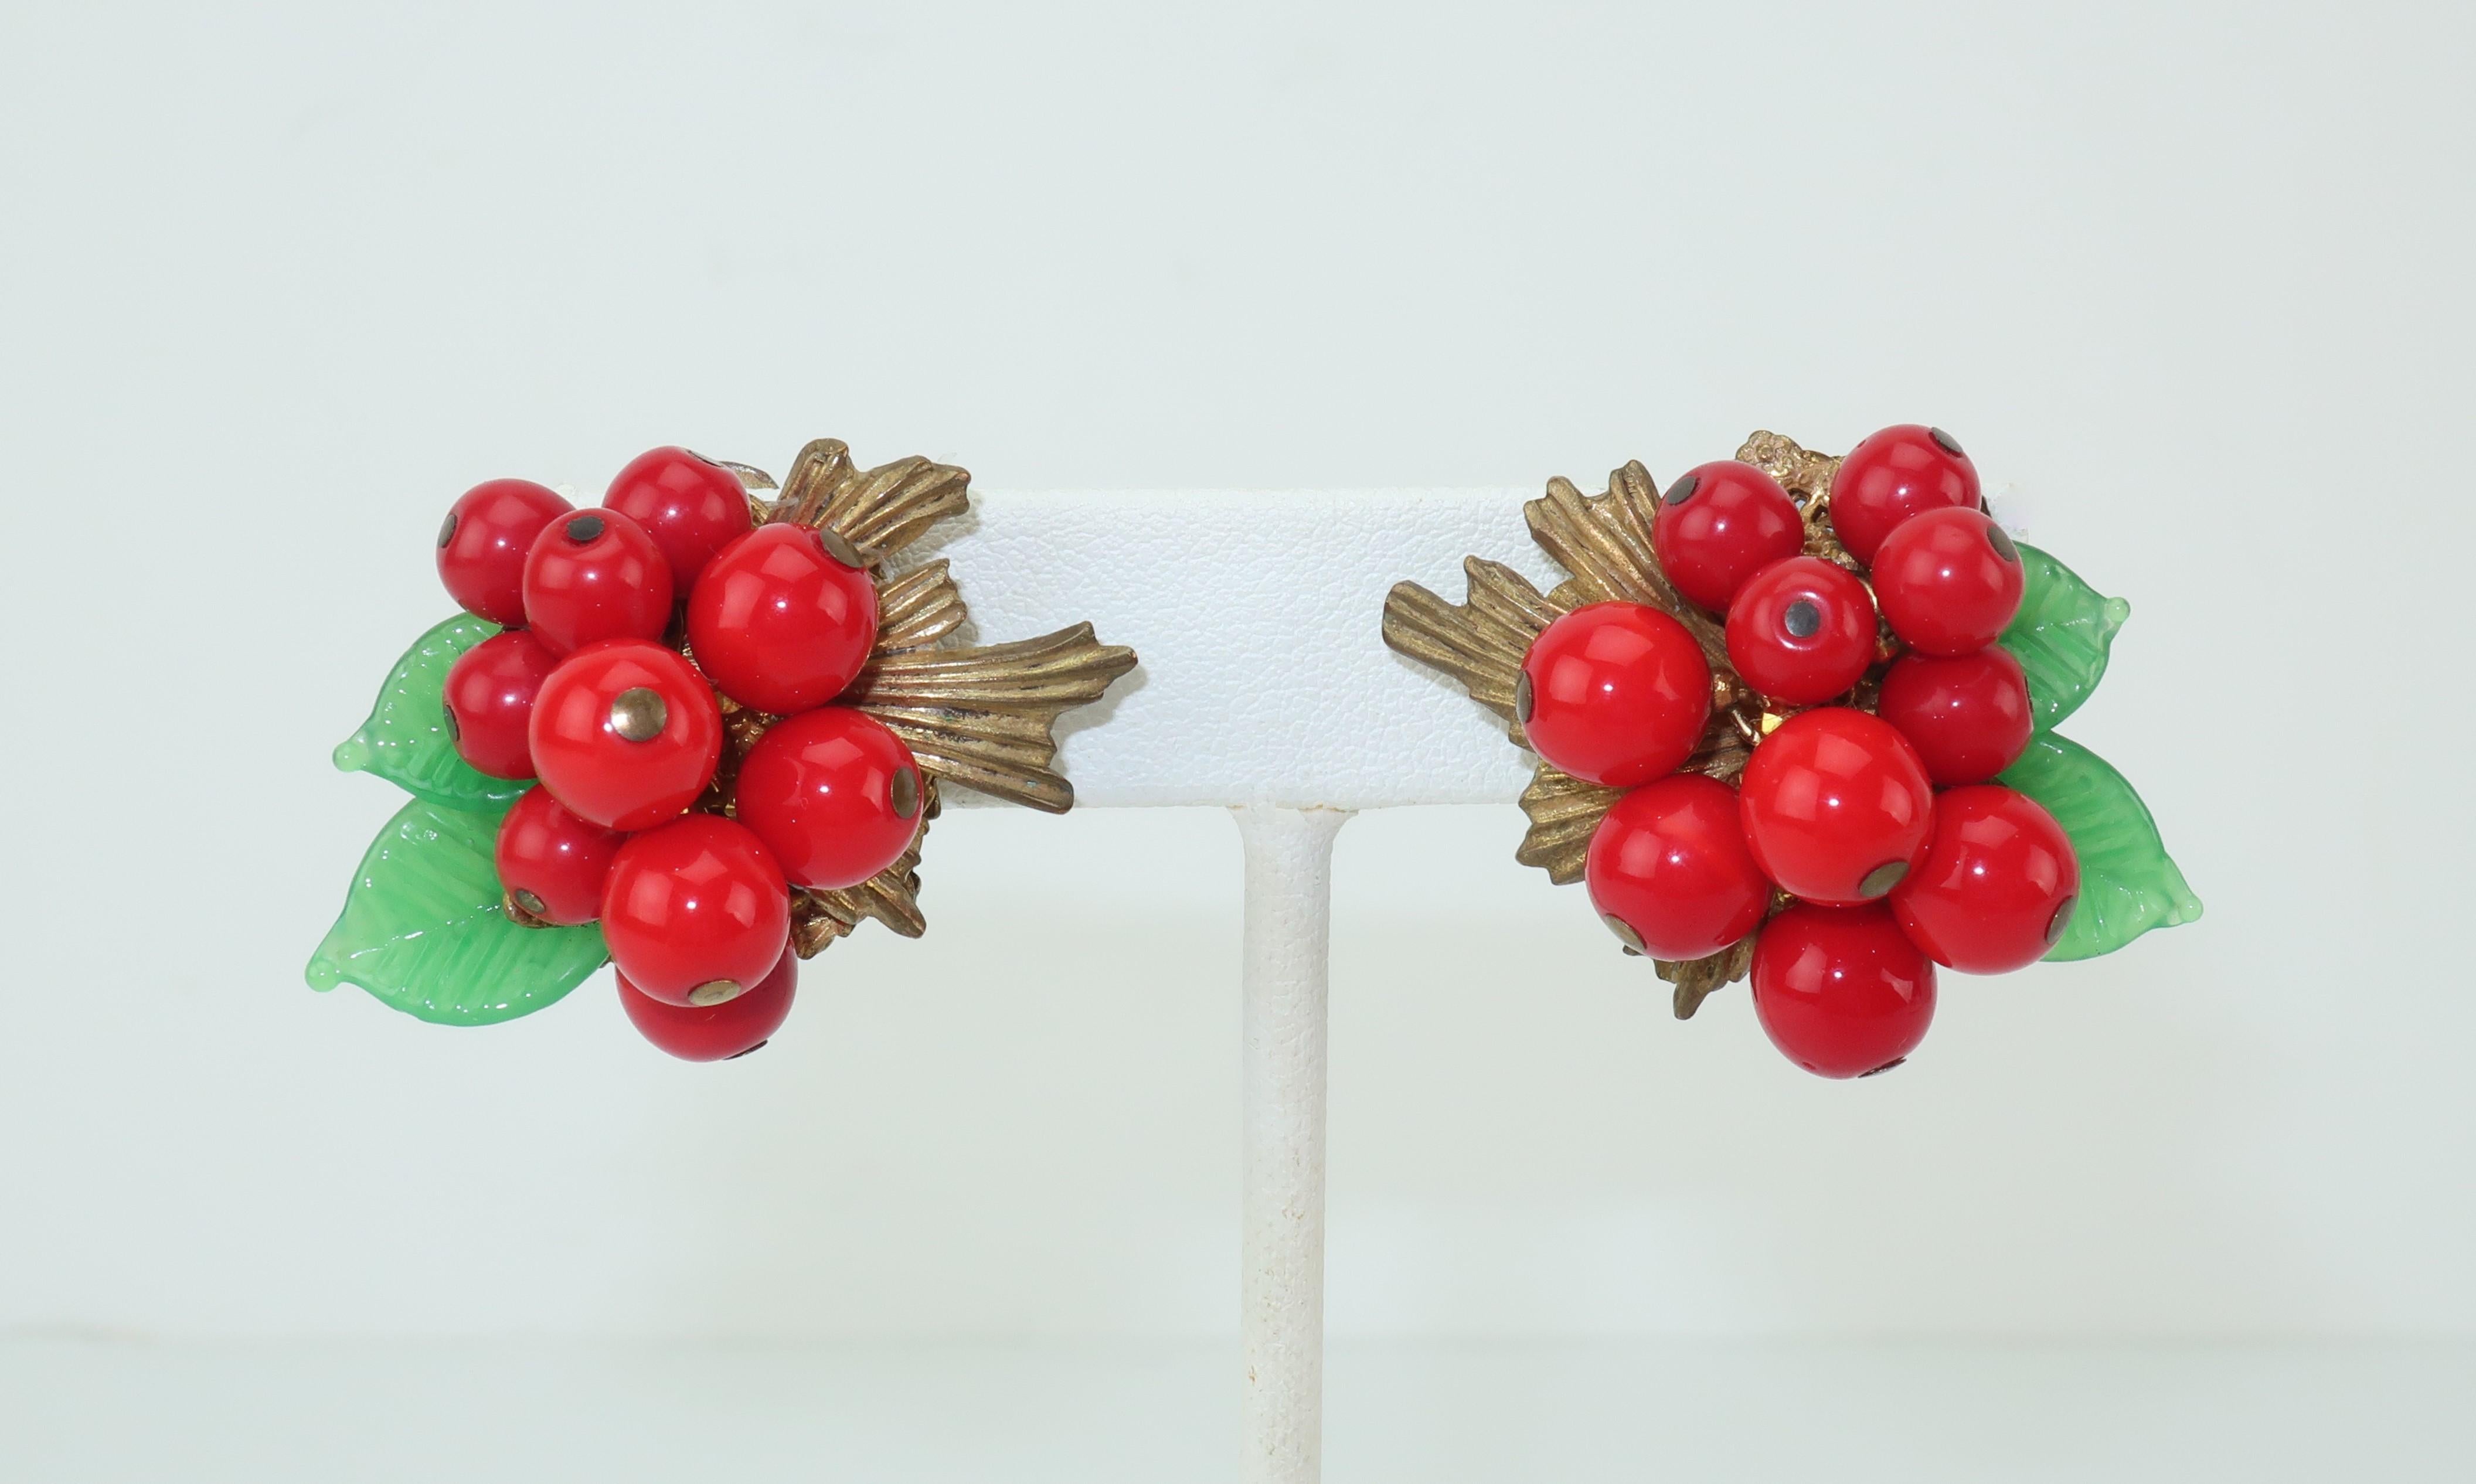 This 1950's Miriam Haskell demi parure, consisting of a brooch and clip on earrings, is reminiscent of holly berries with a vibrant combination of red glass beads and green glass leaves.  The wreath style brooch features 'berries' that dangle and